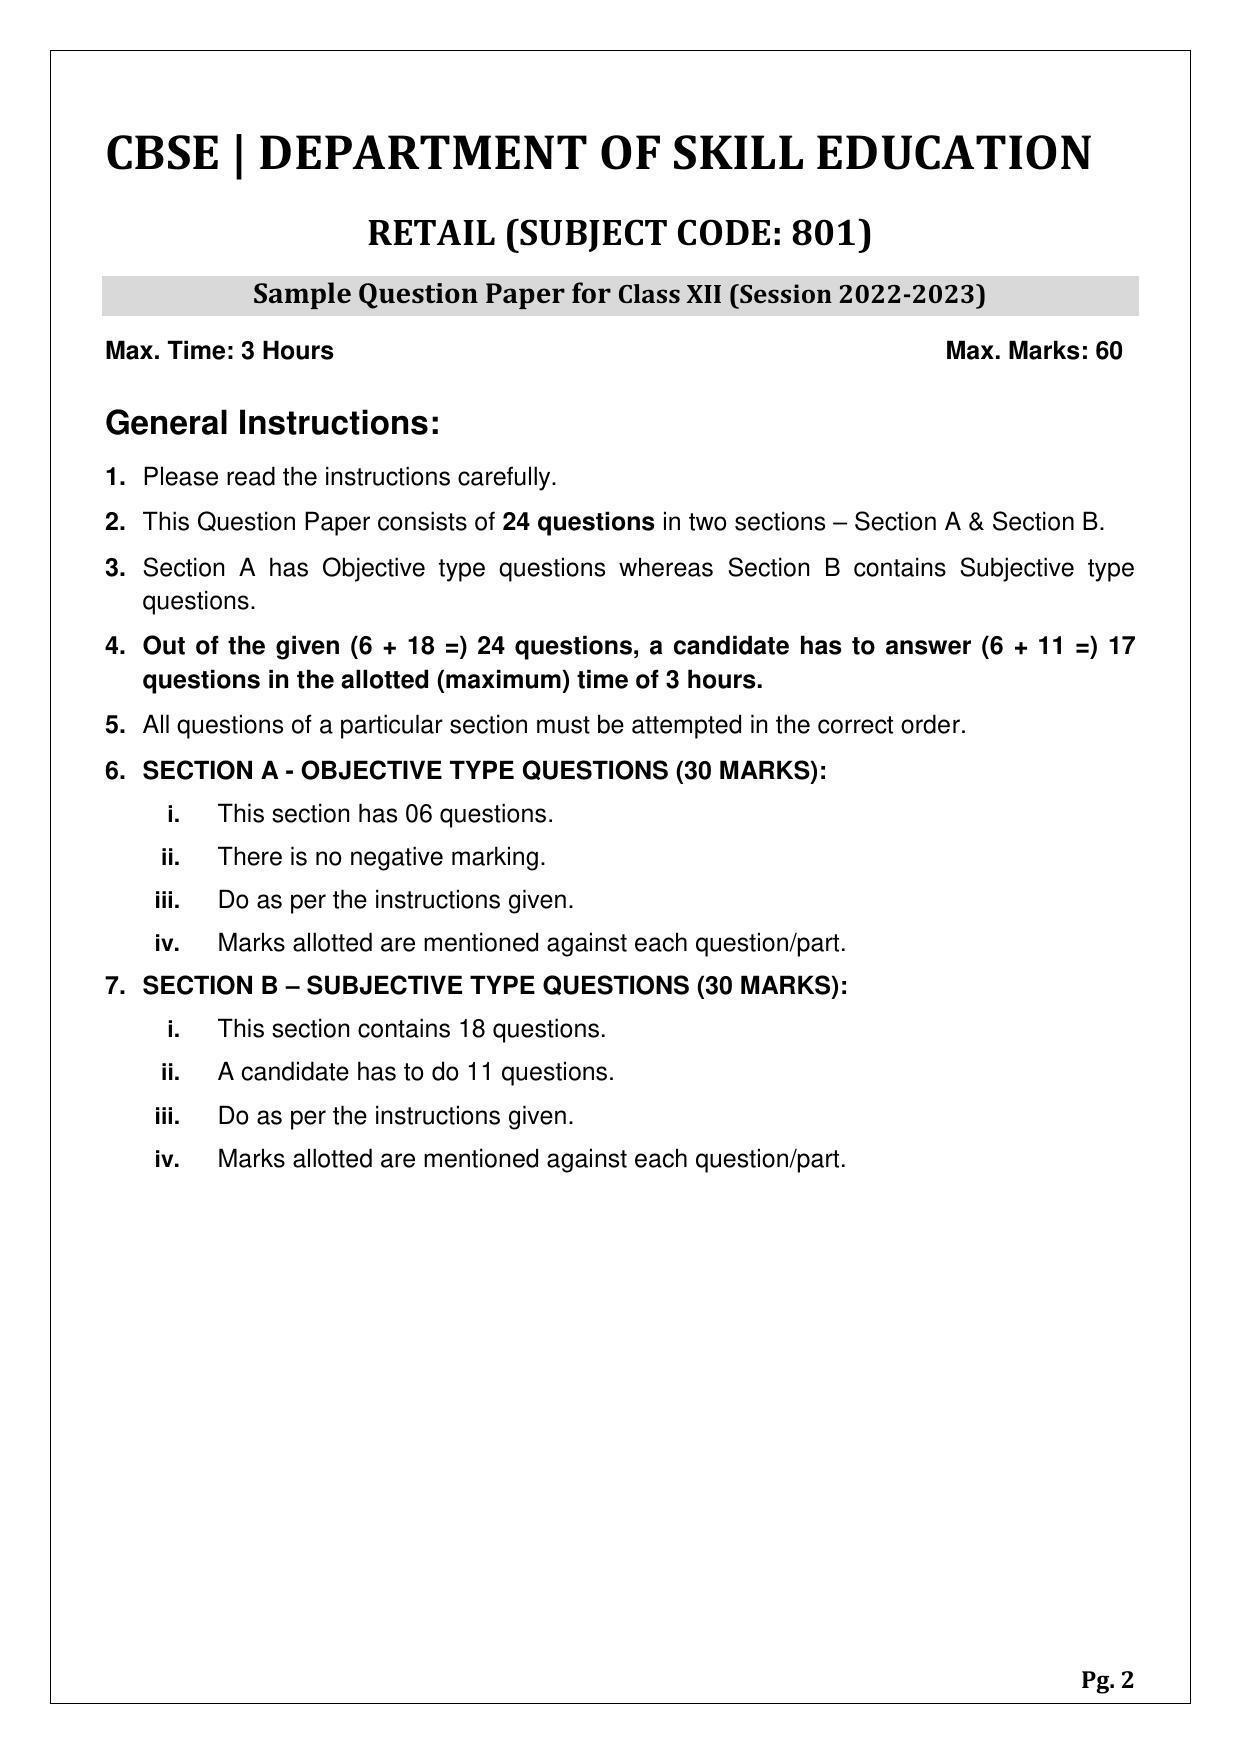 CBSE Class 12 Retail Sample Papers 2023 - Page 2